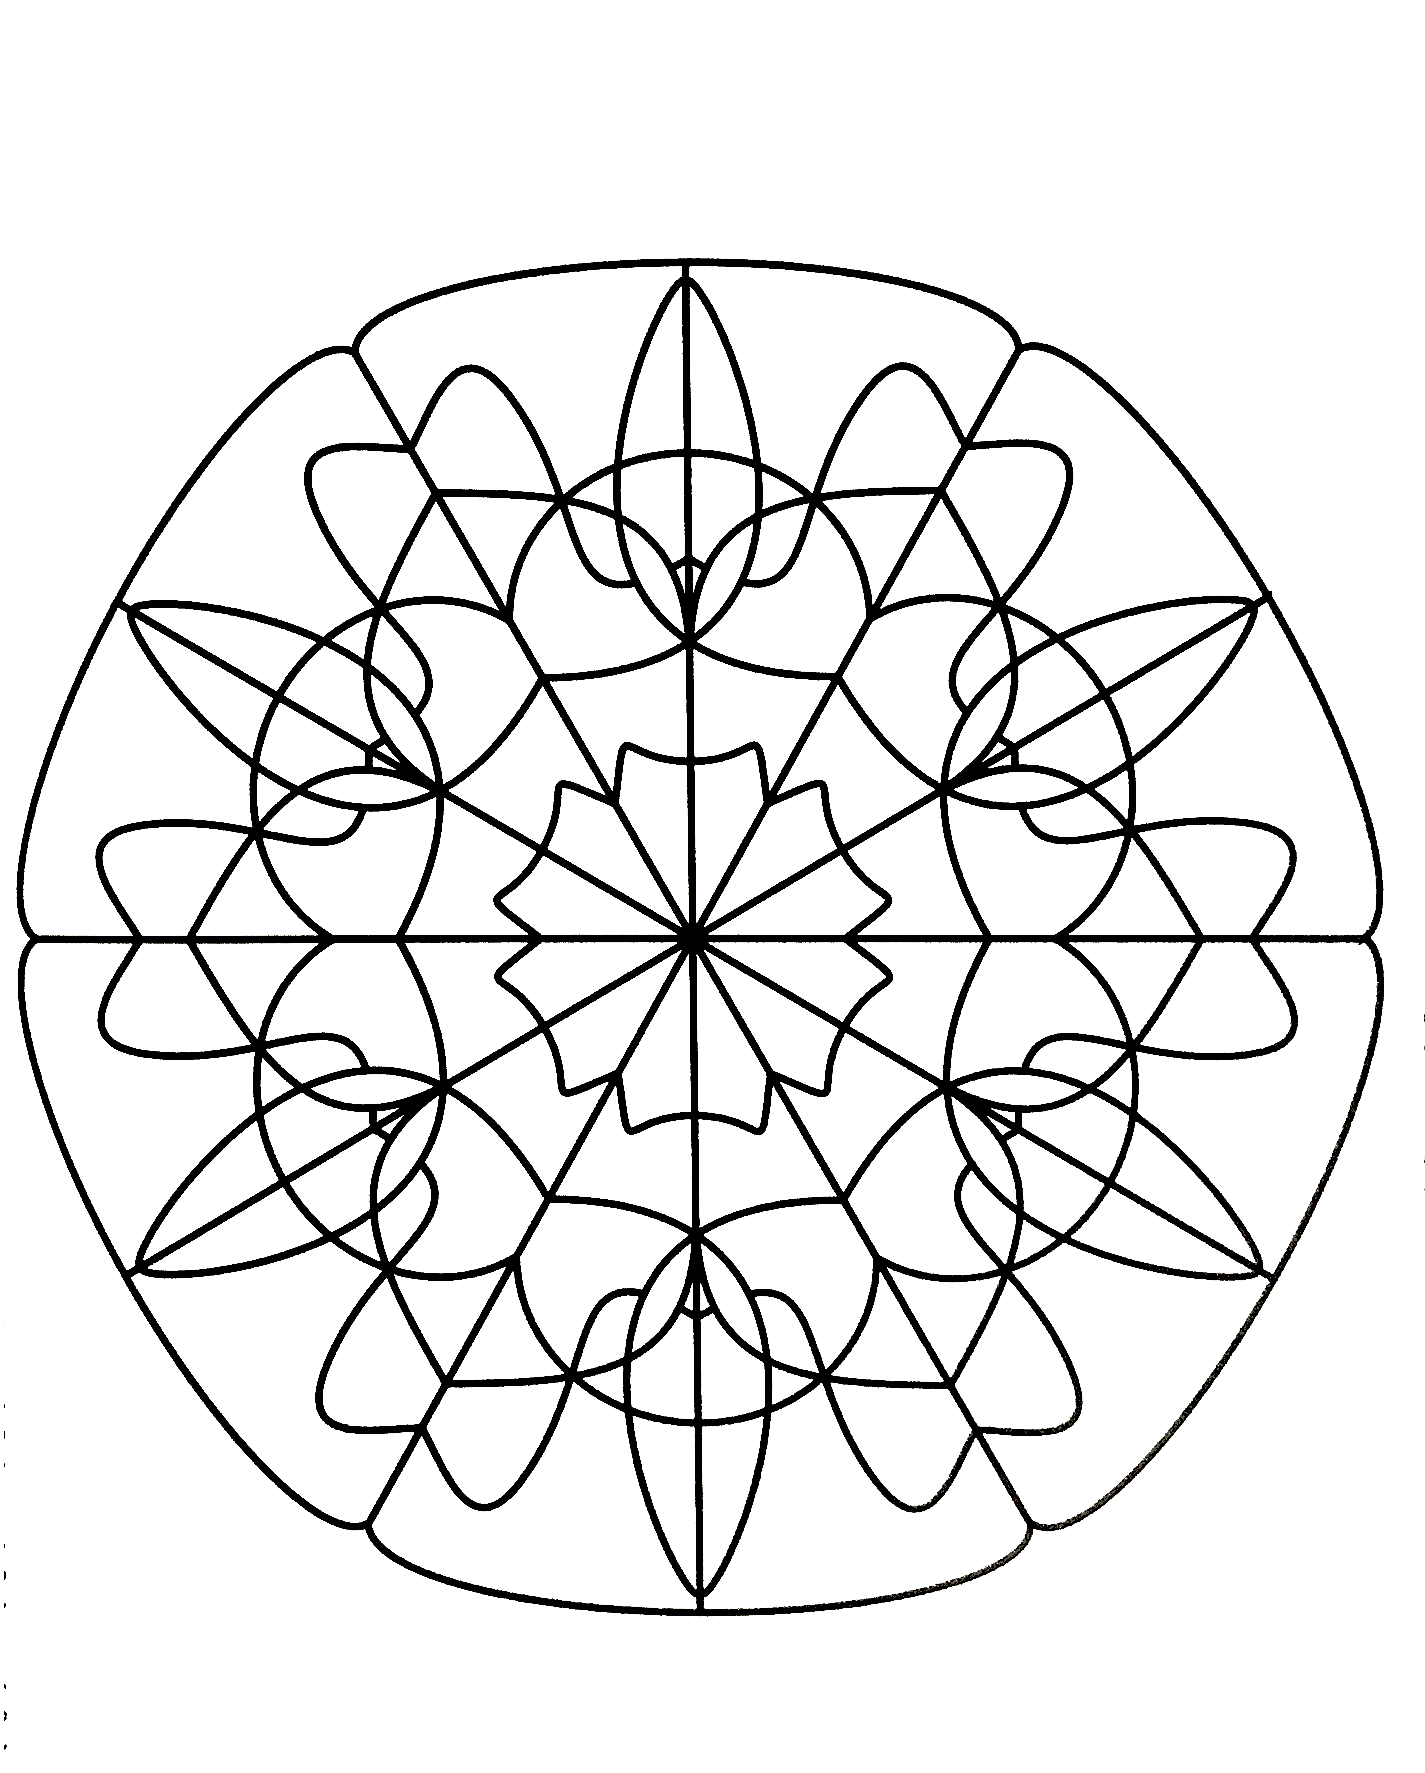 Mandalas to download for free - 21 - Image with : , 